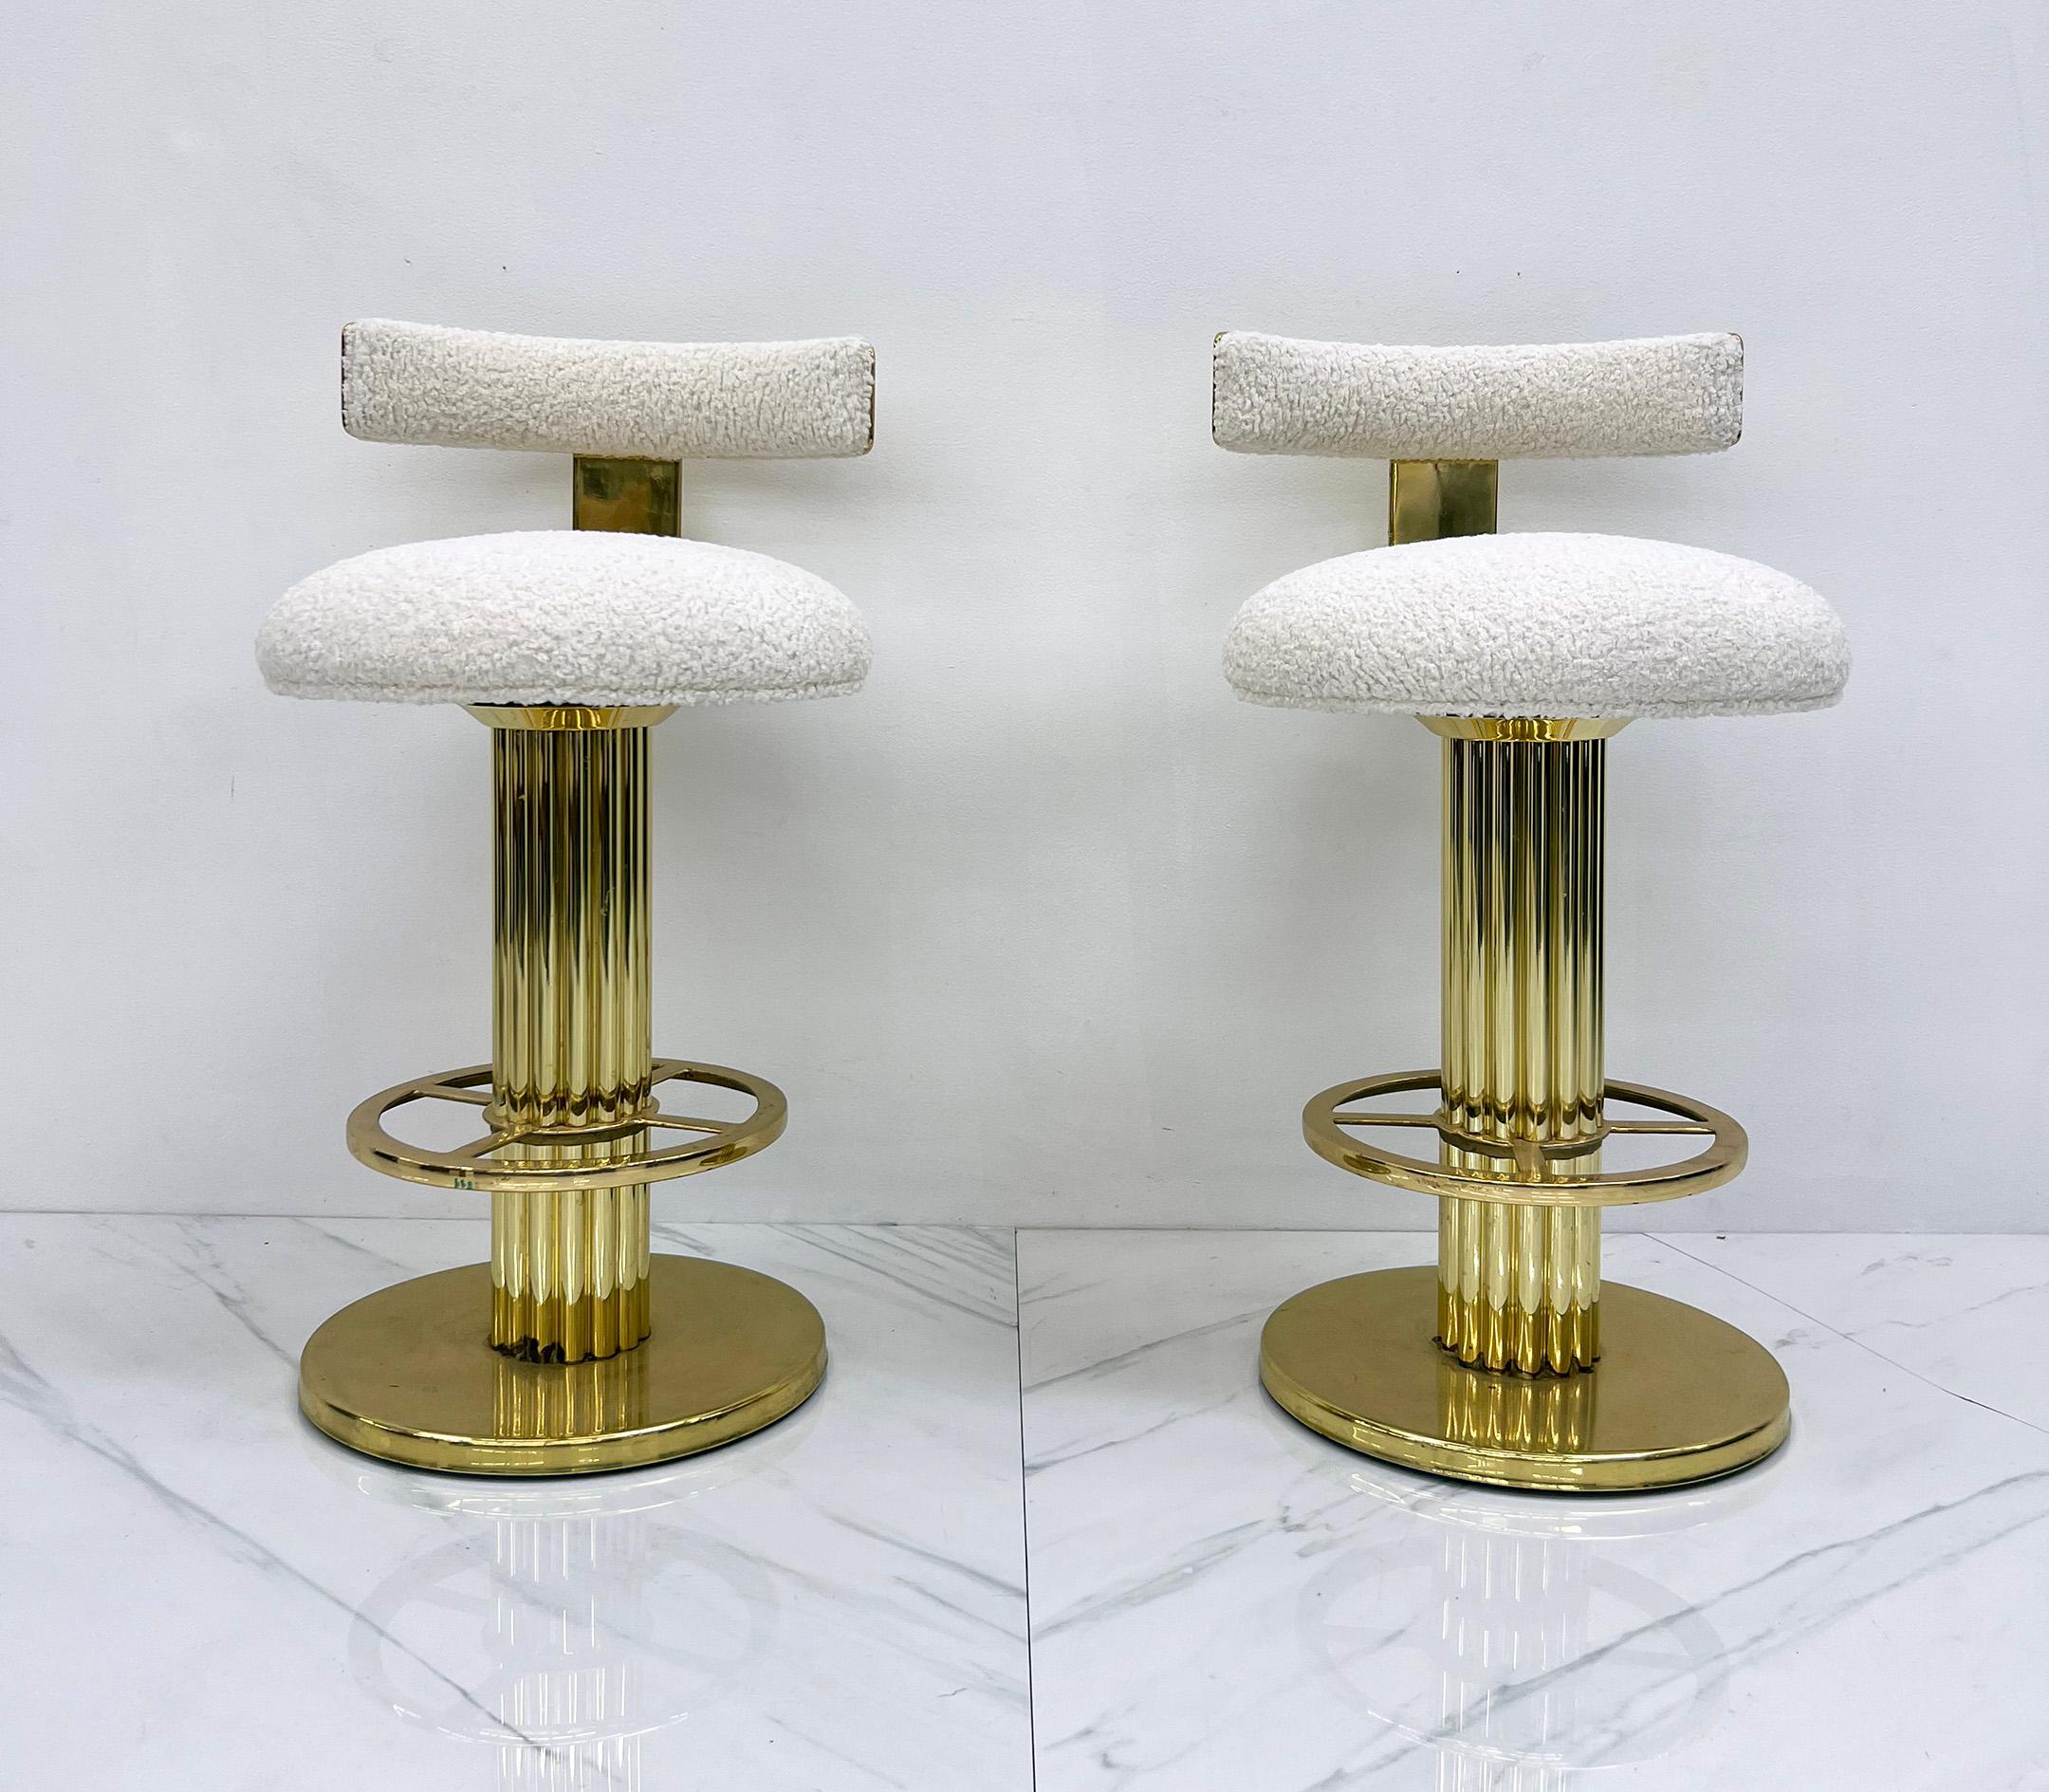 These bar stools are absolutely stunning! Designs for Leisure, was a high end seating source for interior design trade from 1980's and 90's and really took design to new heights with these barstools. This particular set is a rare brass set.

These